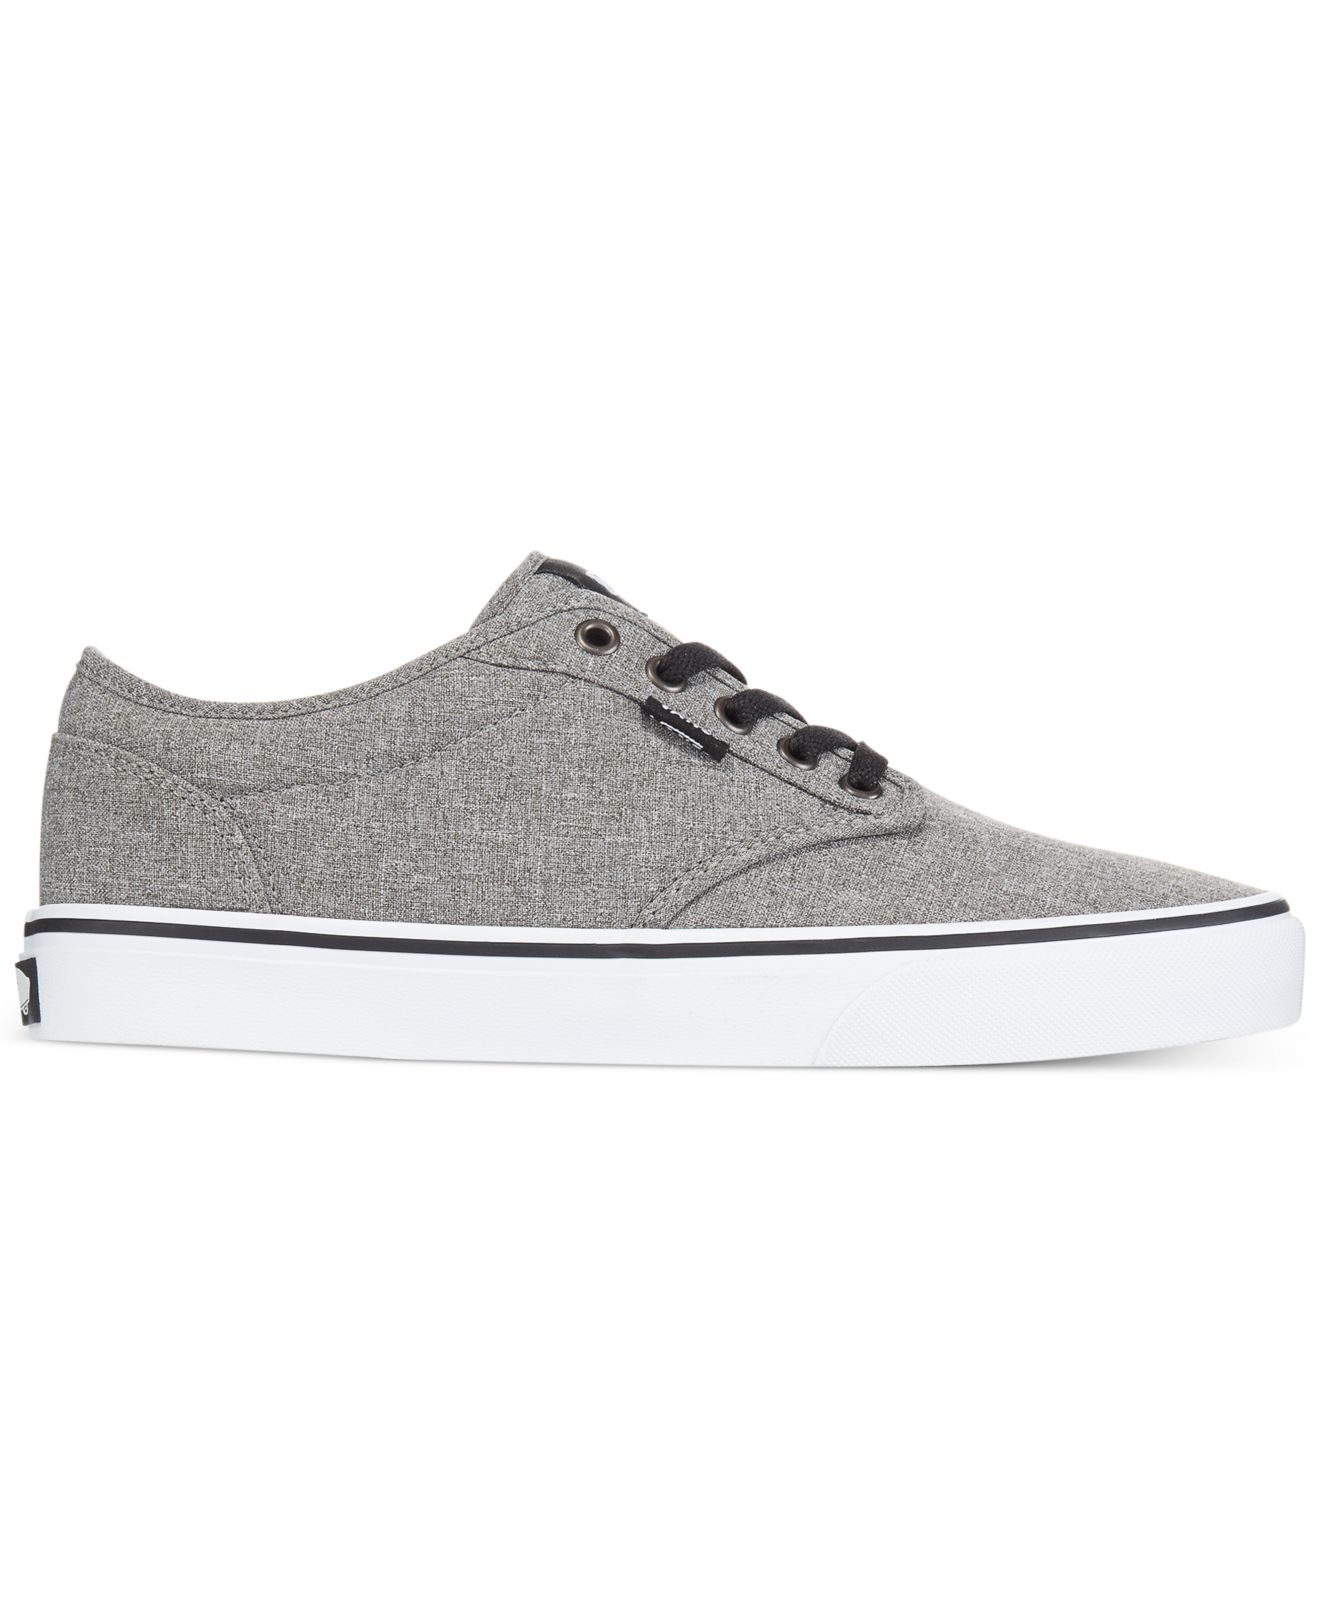 vans atwood grey and black